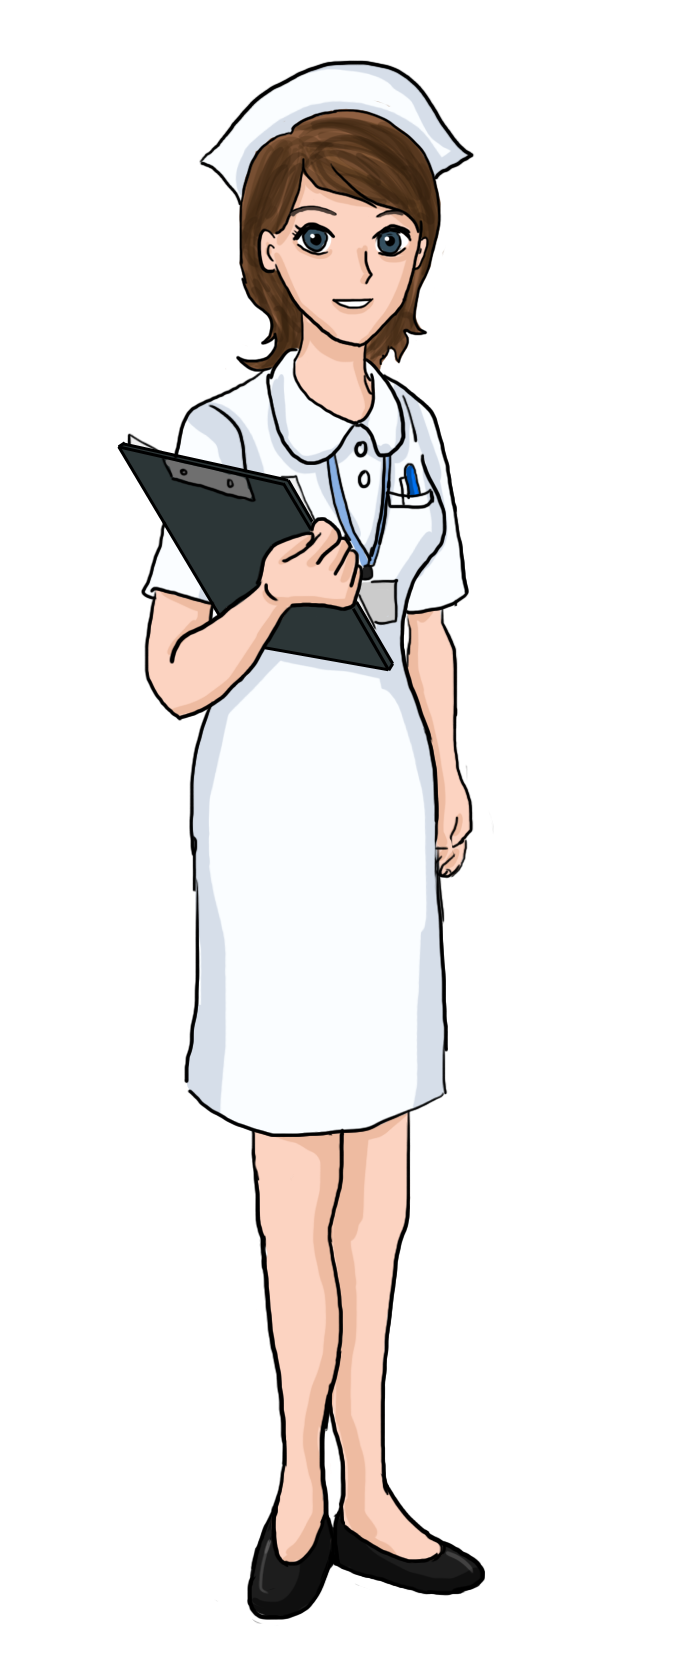 You can use this lovely nurse